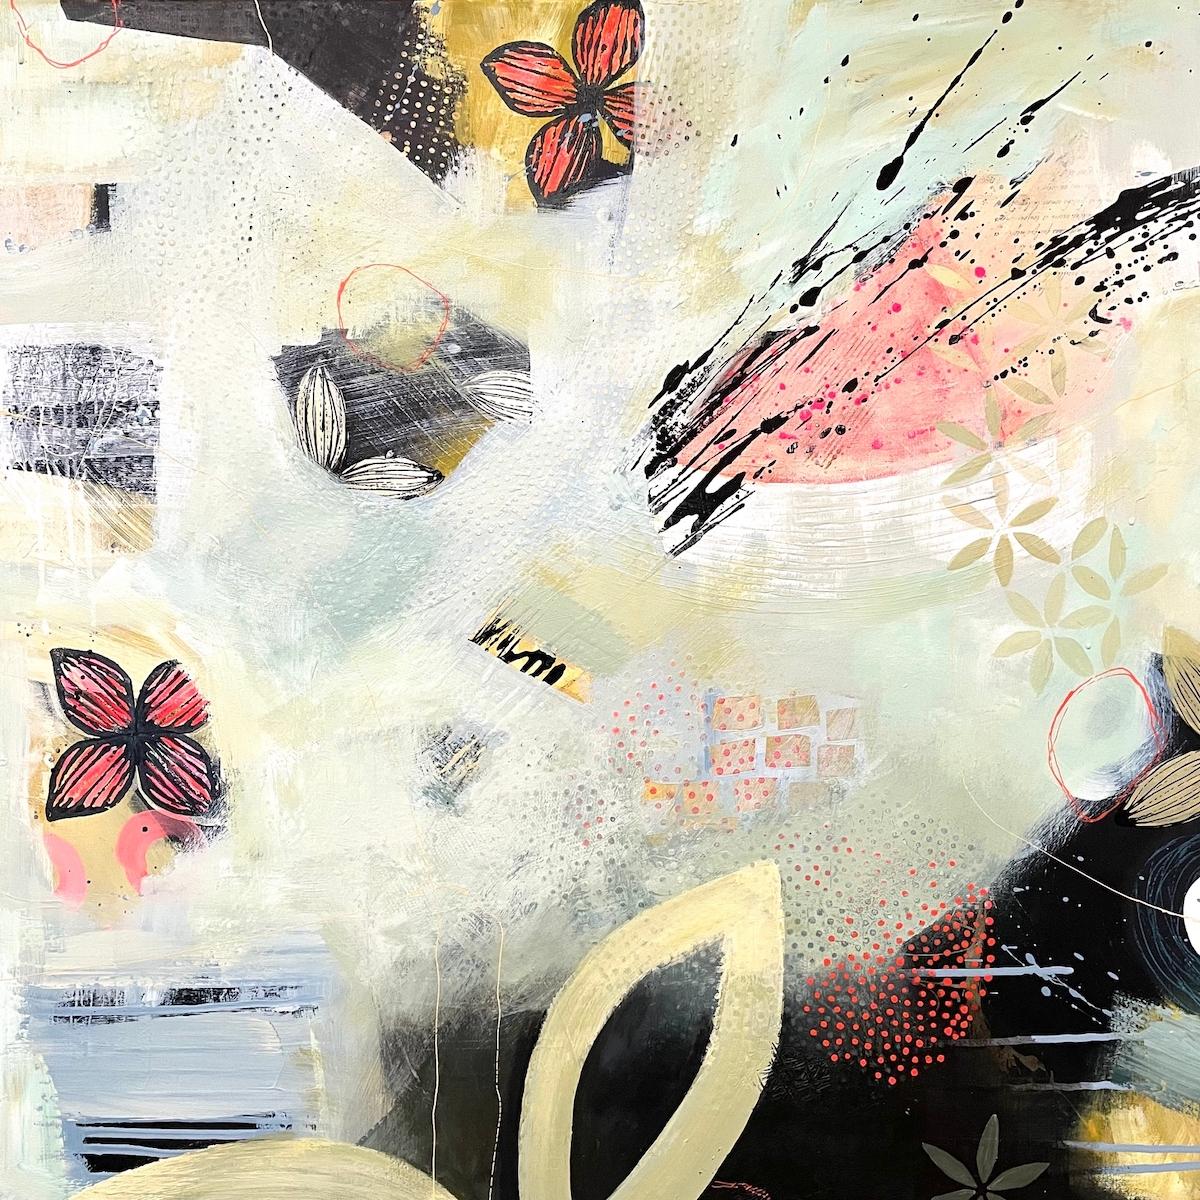 Alison Gilbert  Abstract Painting - Letting Go by Alison Gilbert, Contemporary art, Abstract, Original painting